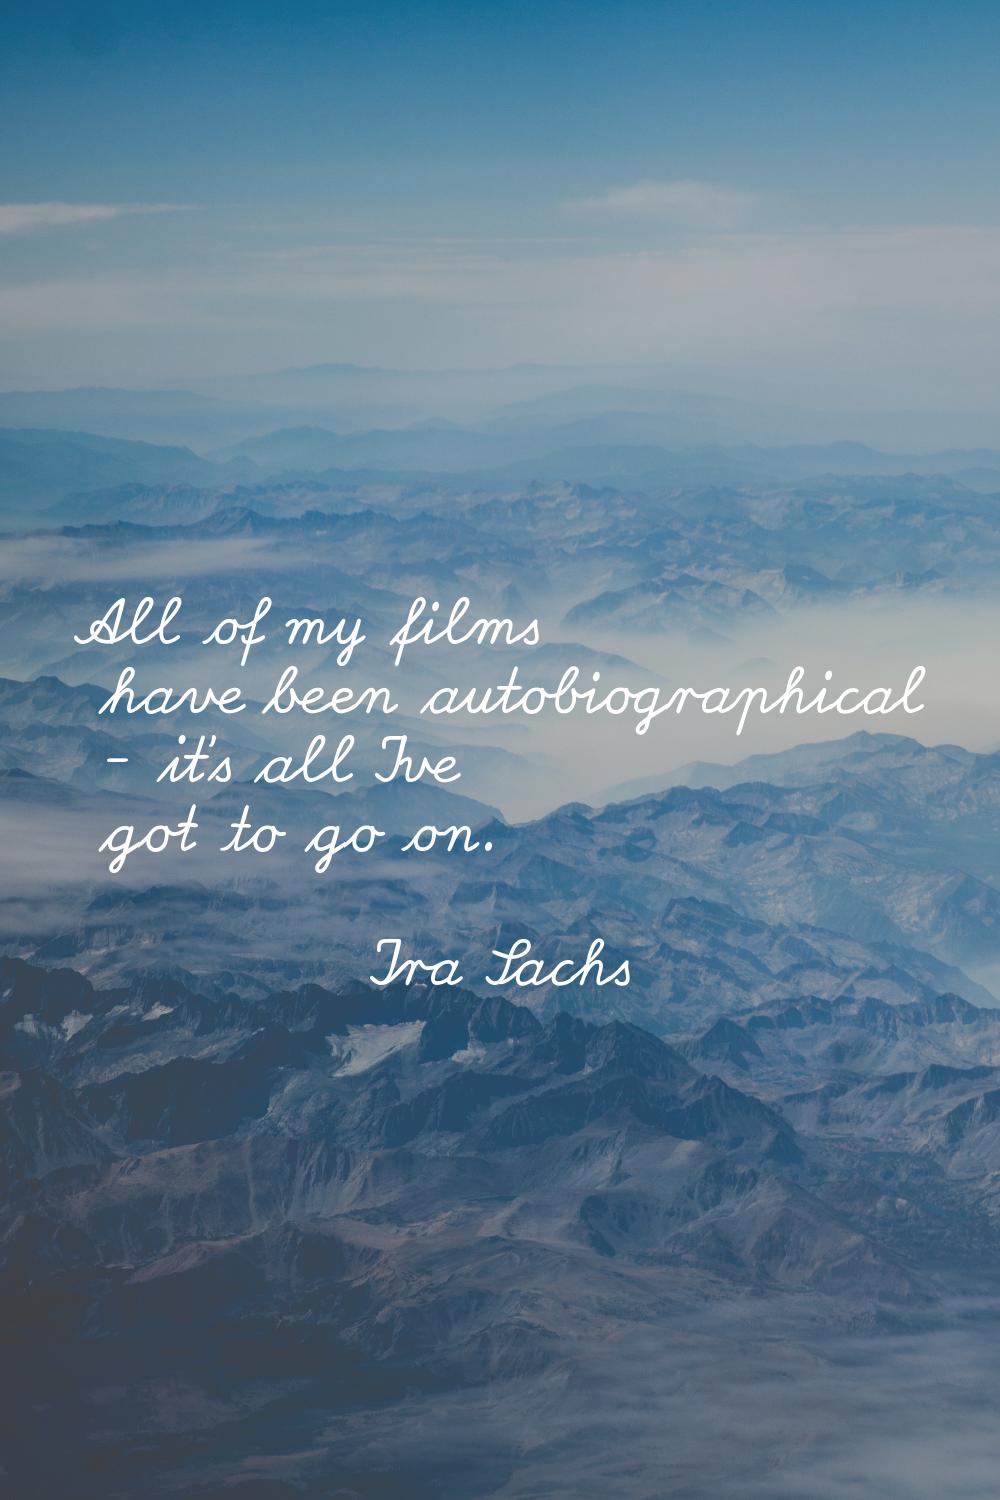 All of my films have been autobiographical - it's all I've got to go on.